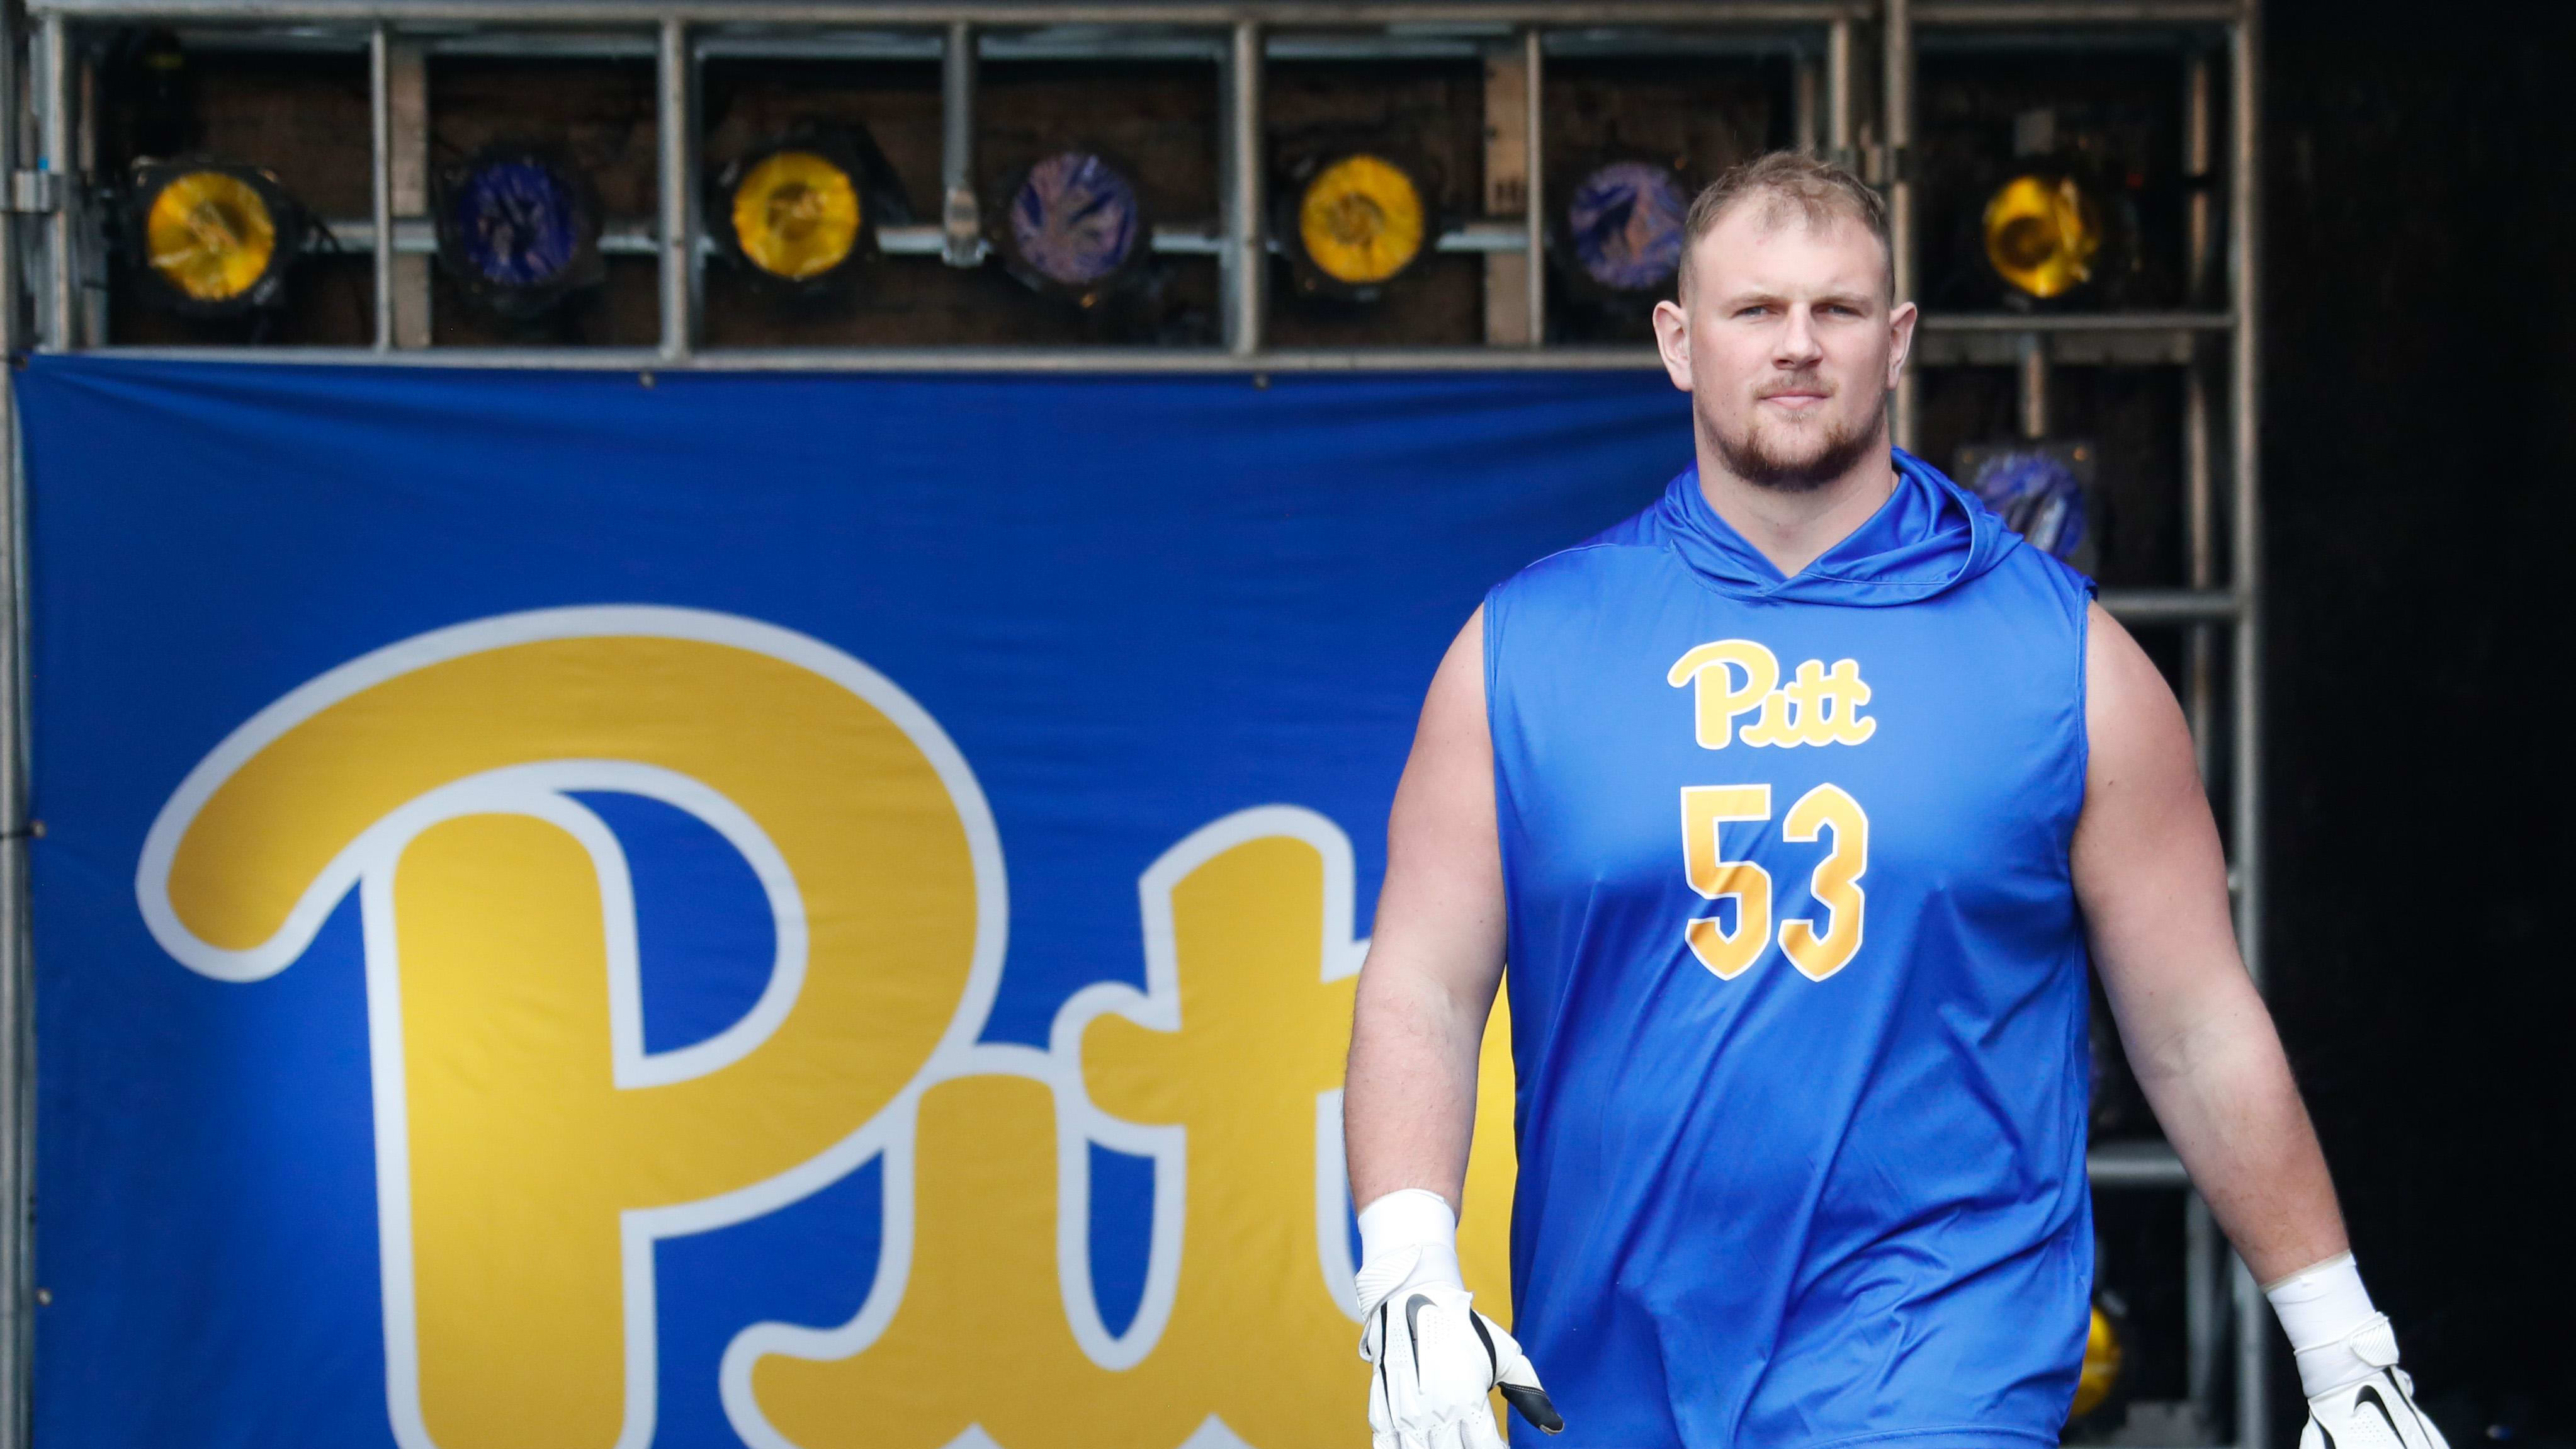 Pitt Panthers OL Jake Kradel Joins Colts Rookie Minicamp with Epps & Goncalves